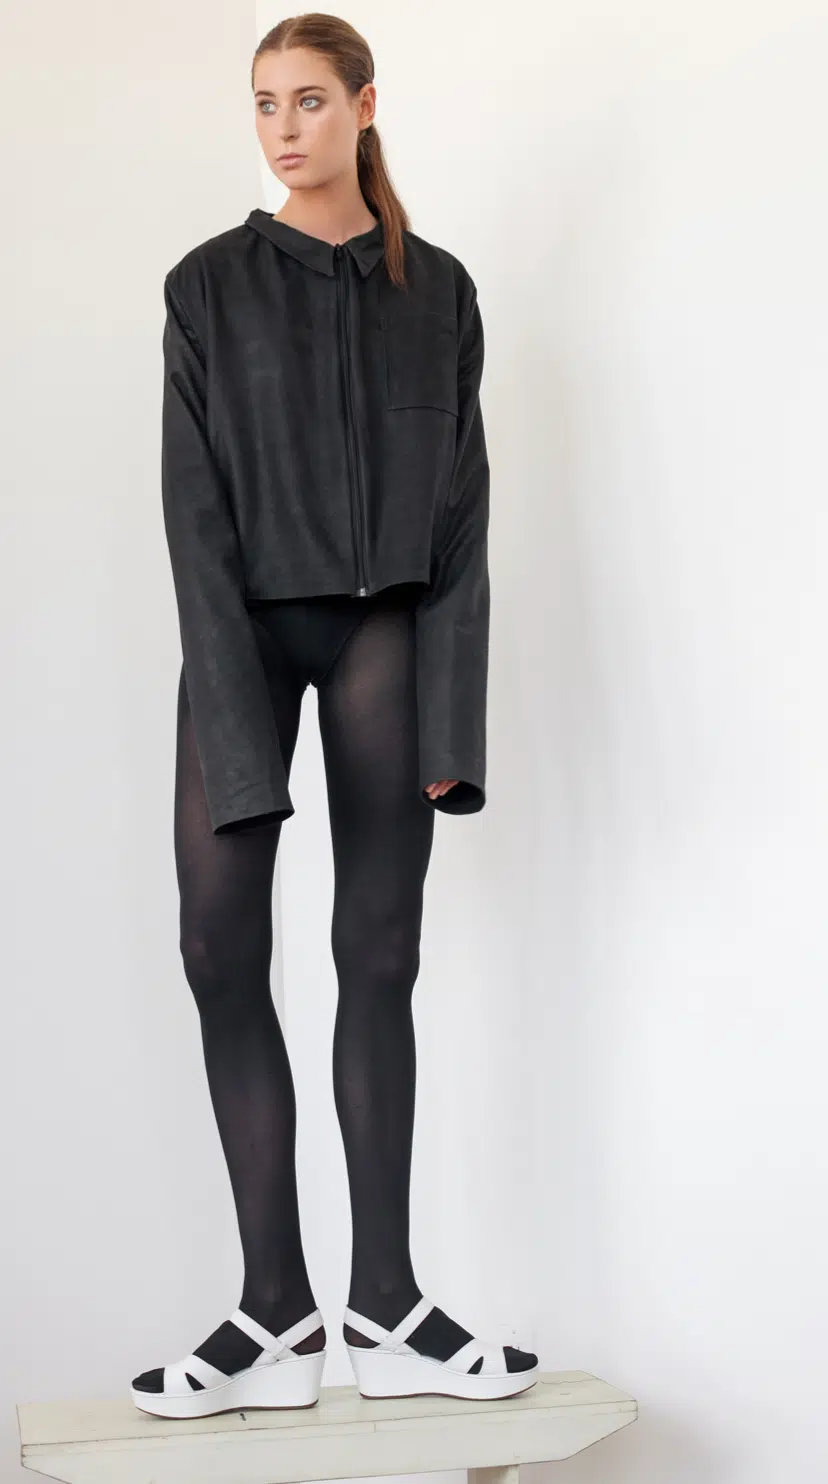 Image from SS15 Collection